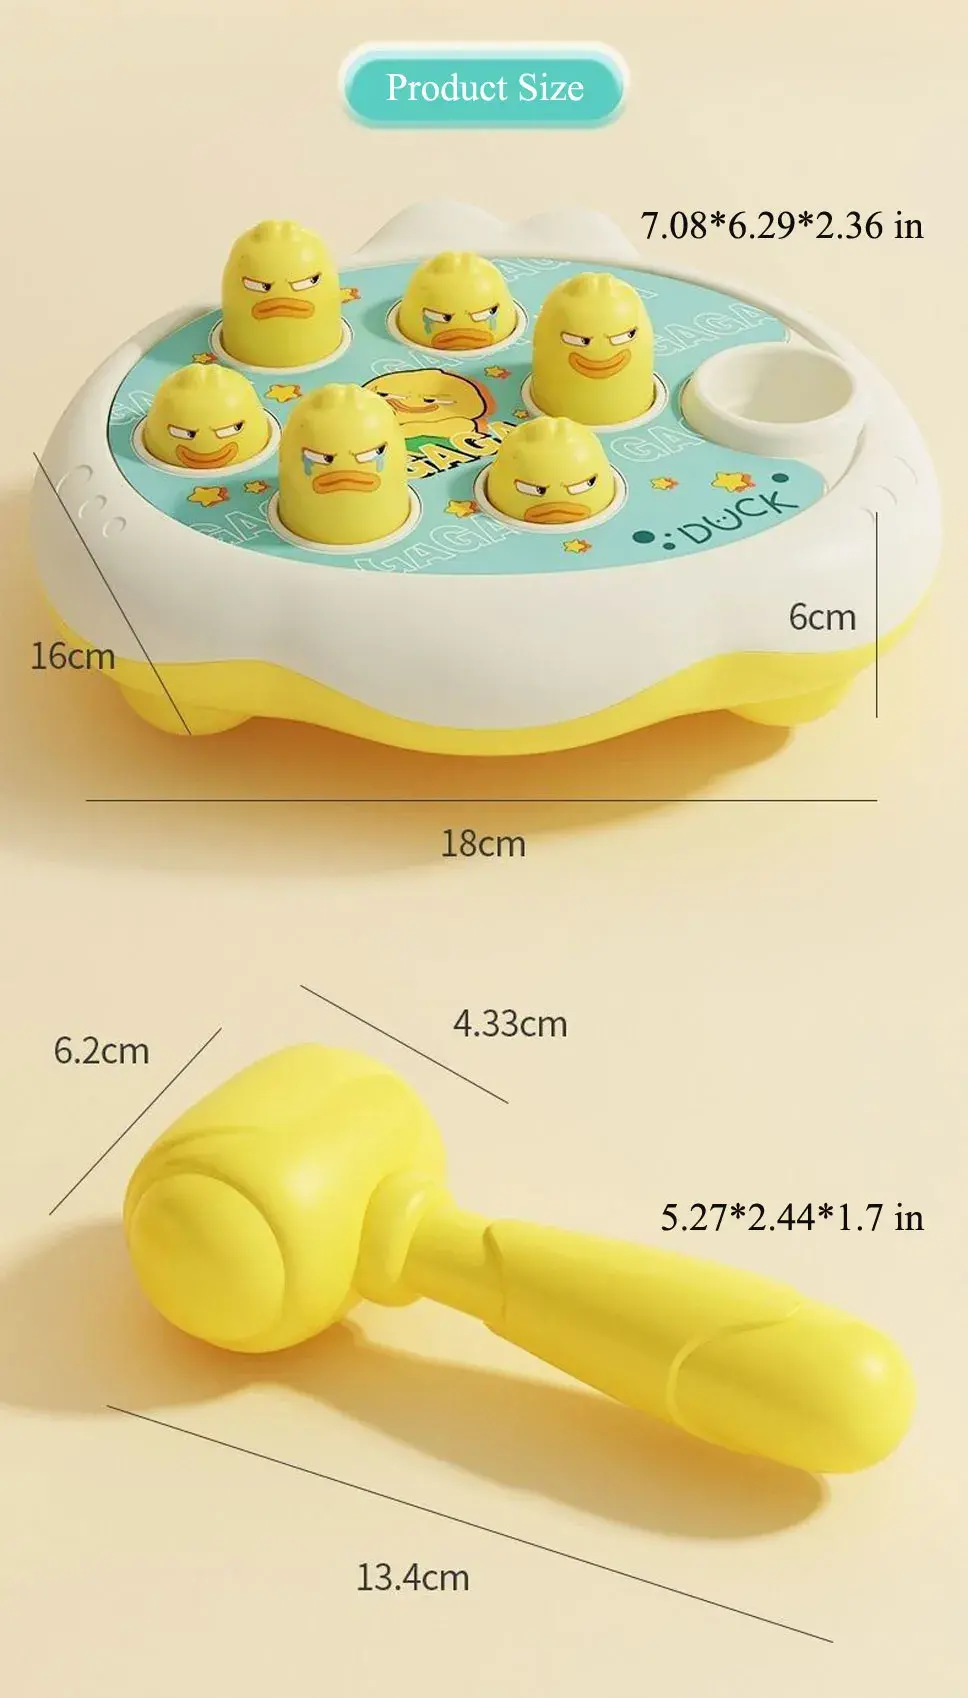 Duck/Frog/Pig Baby Toy Montessori Learning Game Educational Puzzle Gift for 12 24 Months Toddler Boy/Girl with Hammer